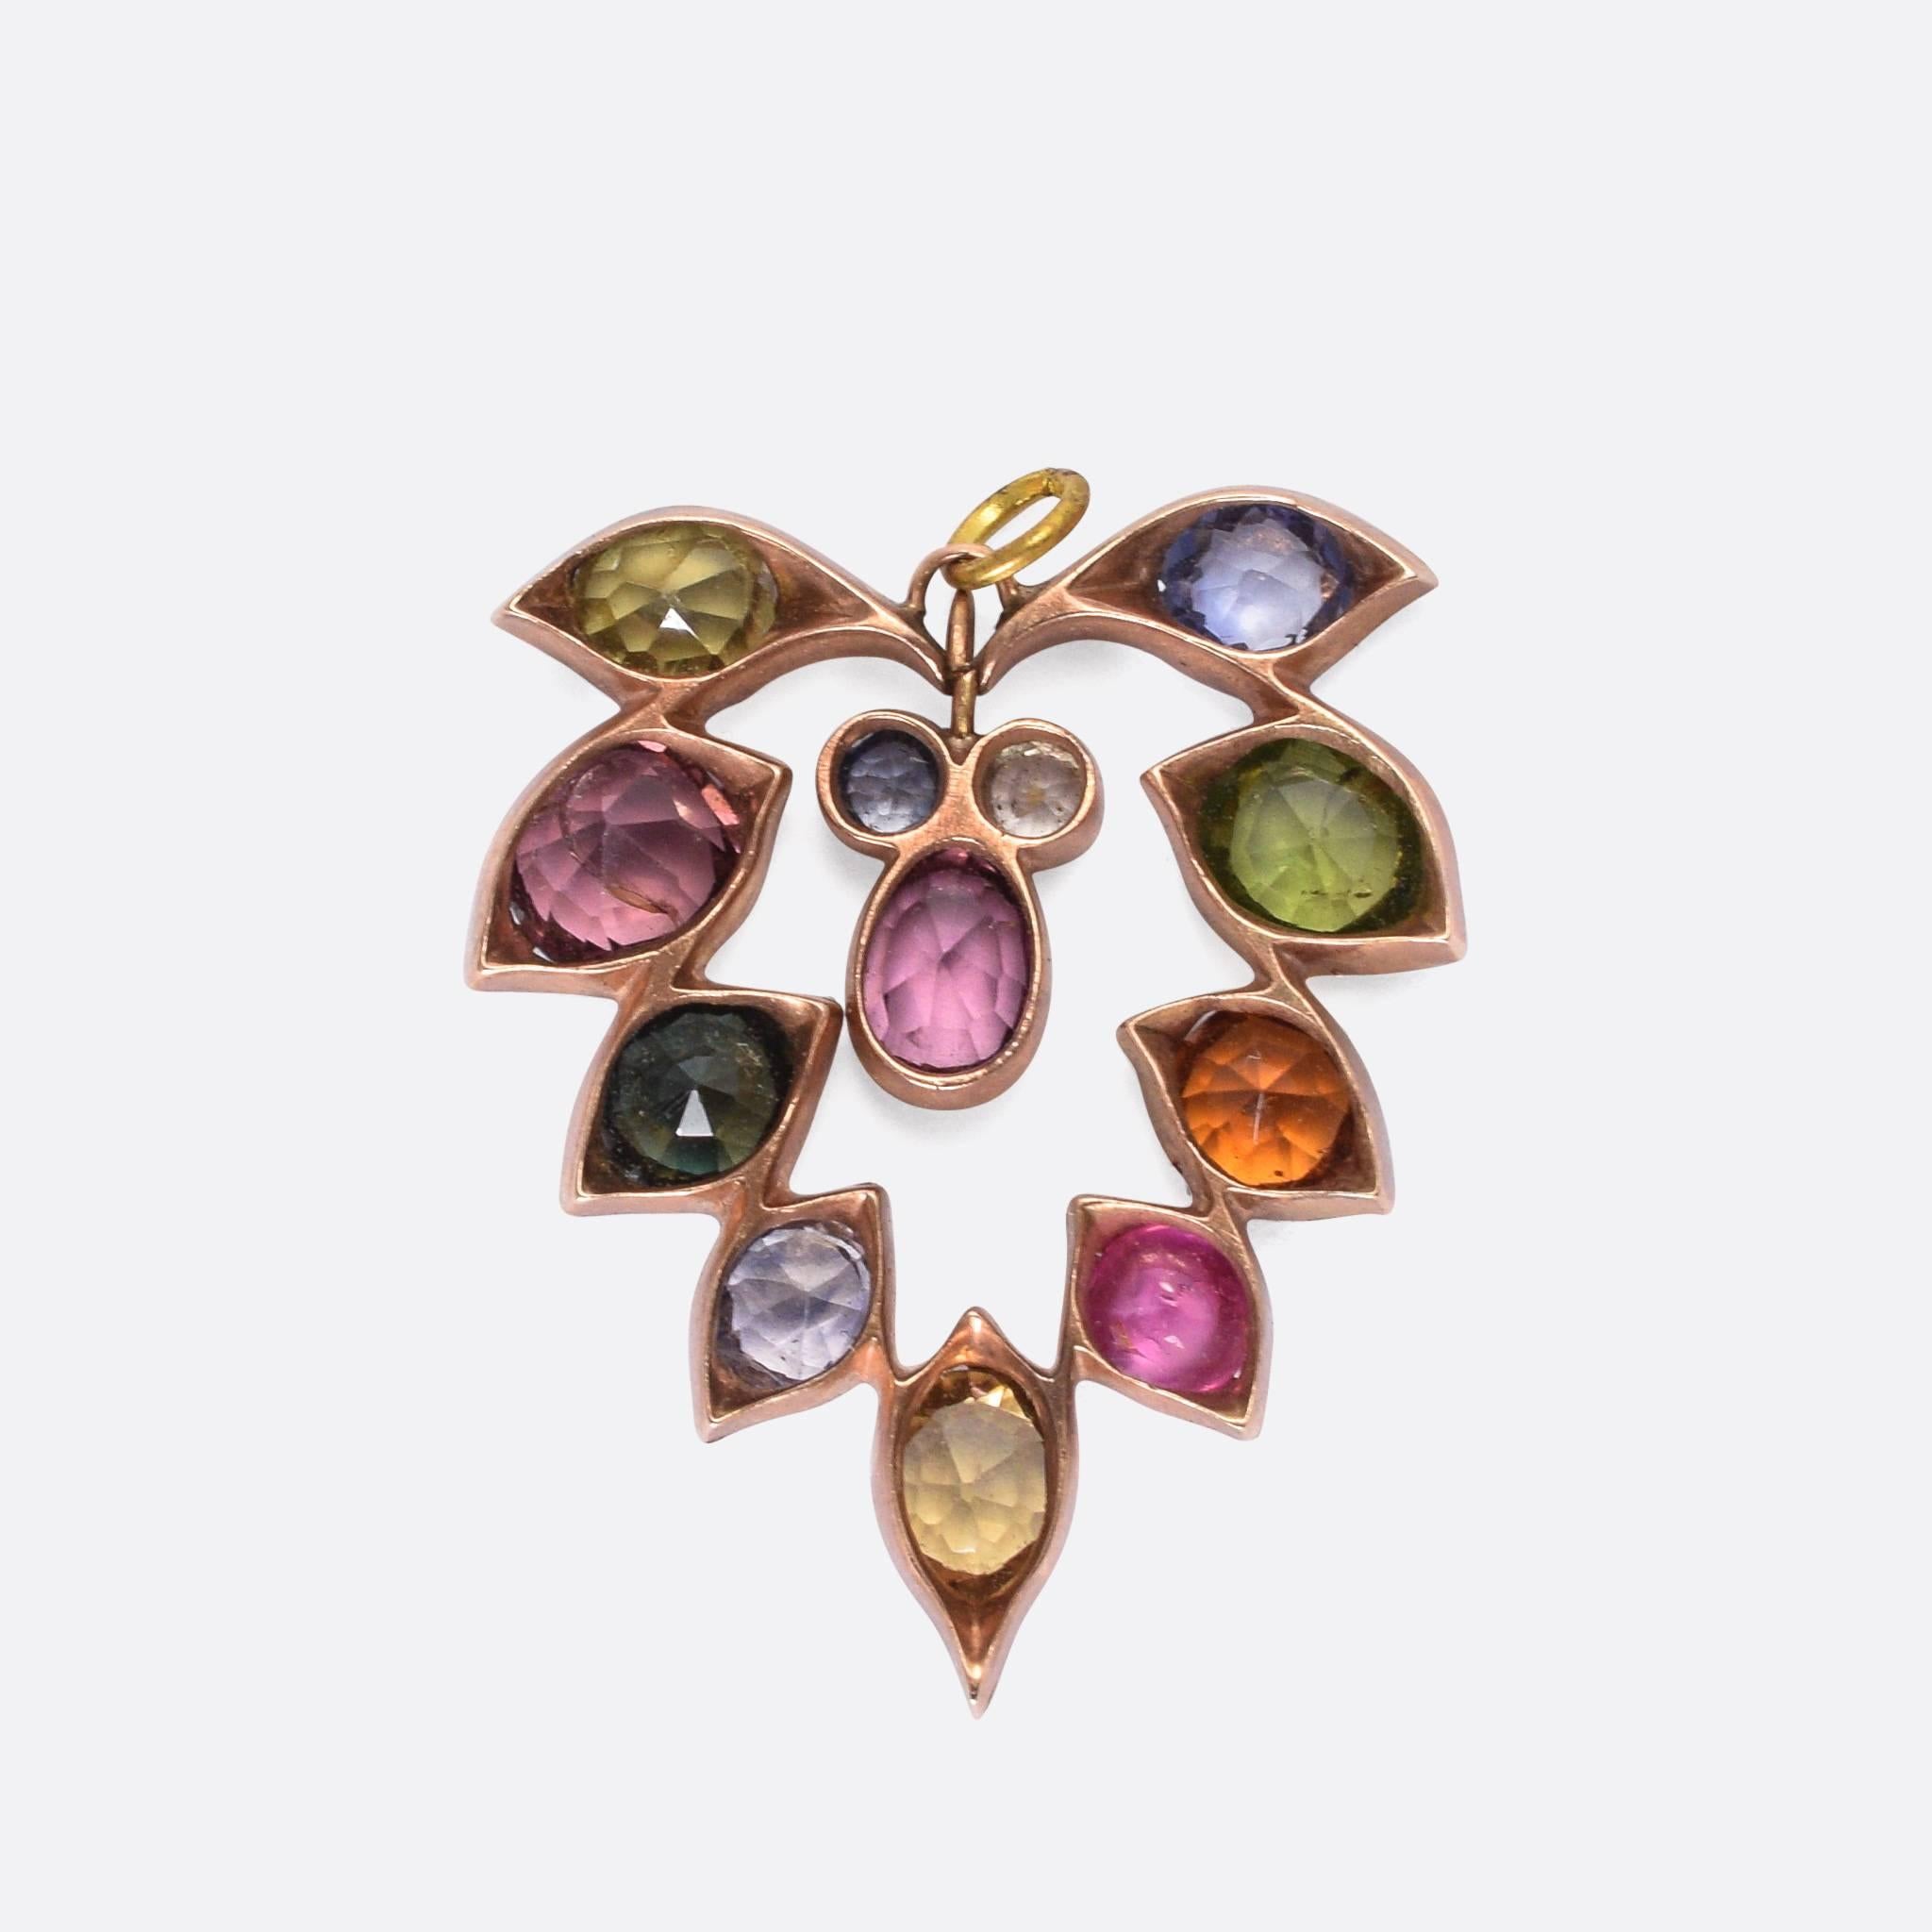 A sweet Victorian multi-gem pendant, set with a variety of natural coloured gemstones. The outer stones rest in stylised 